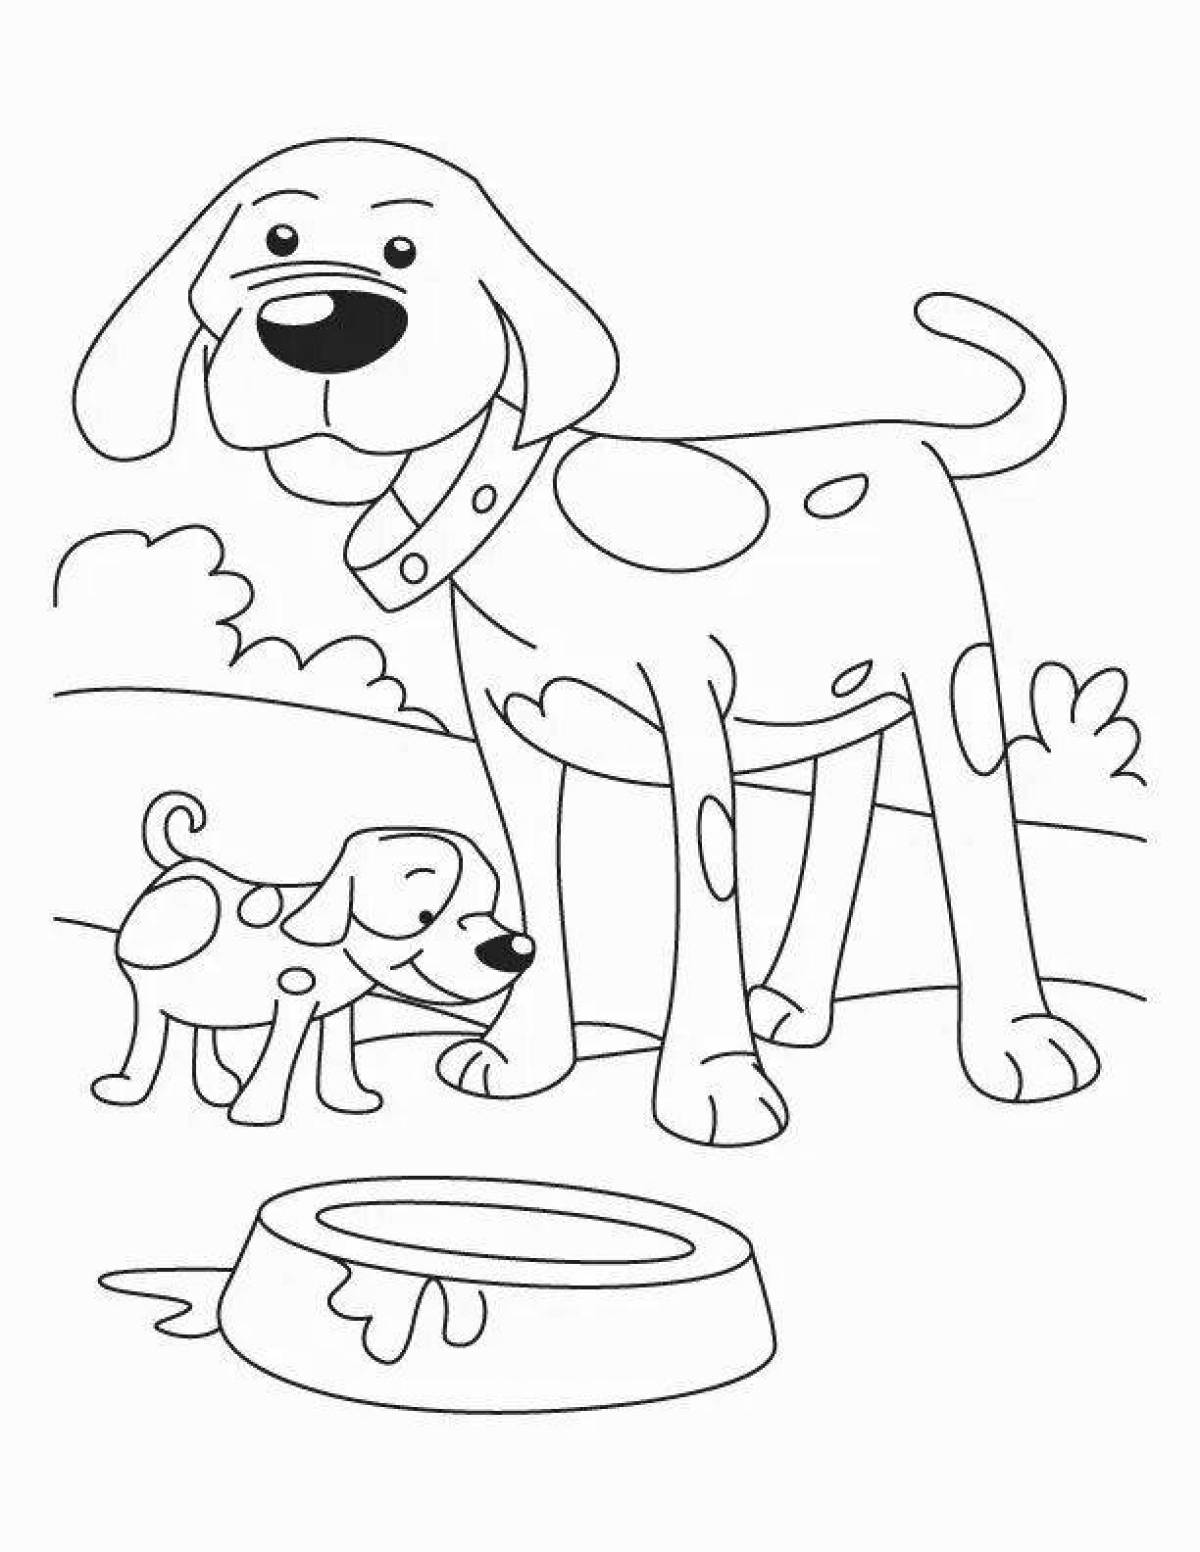 Snuggly coloring page dog